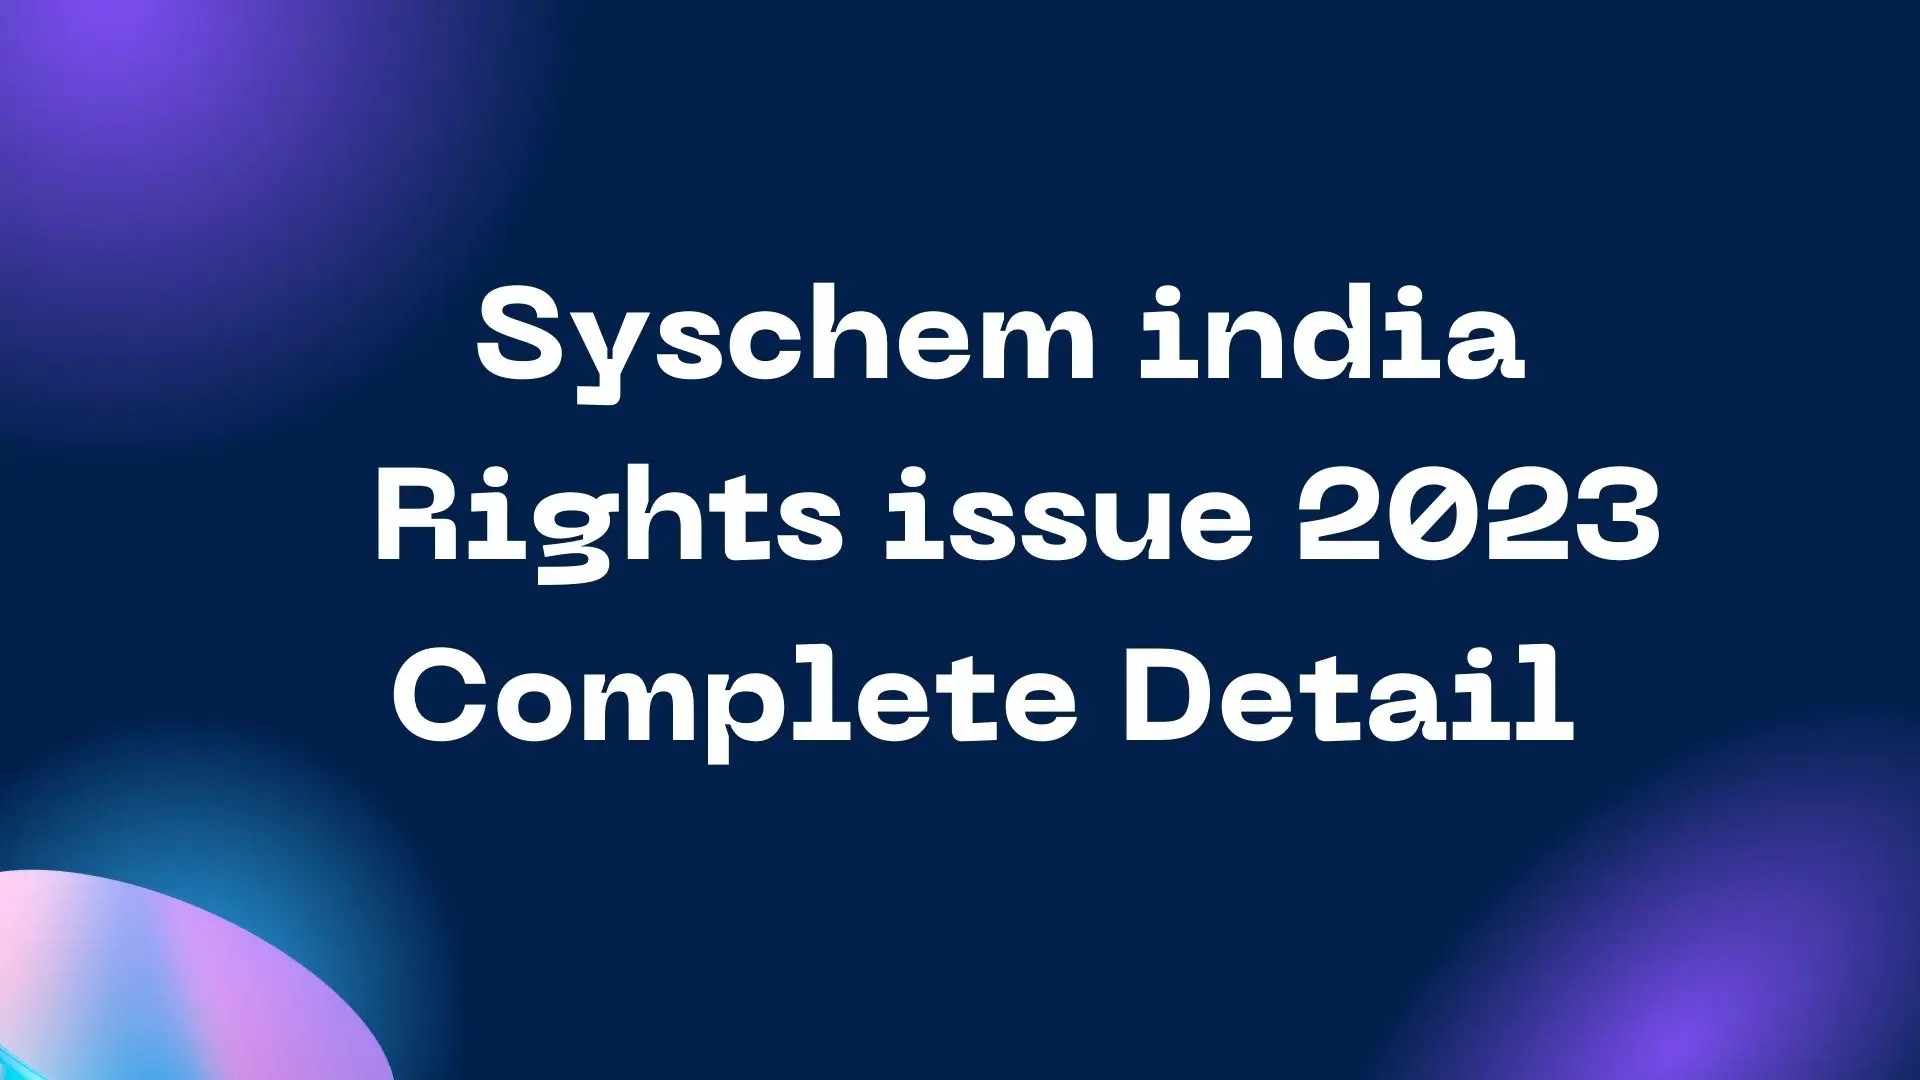 Syschem india rights issue 2023 Complete Detail